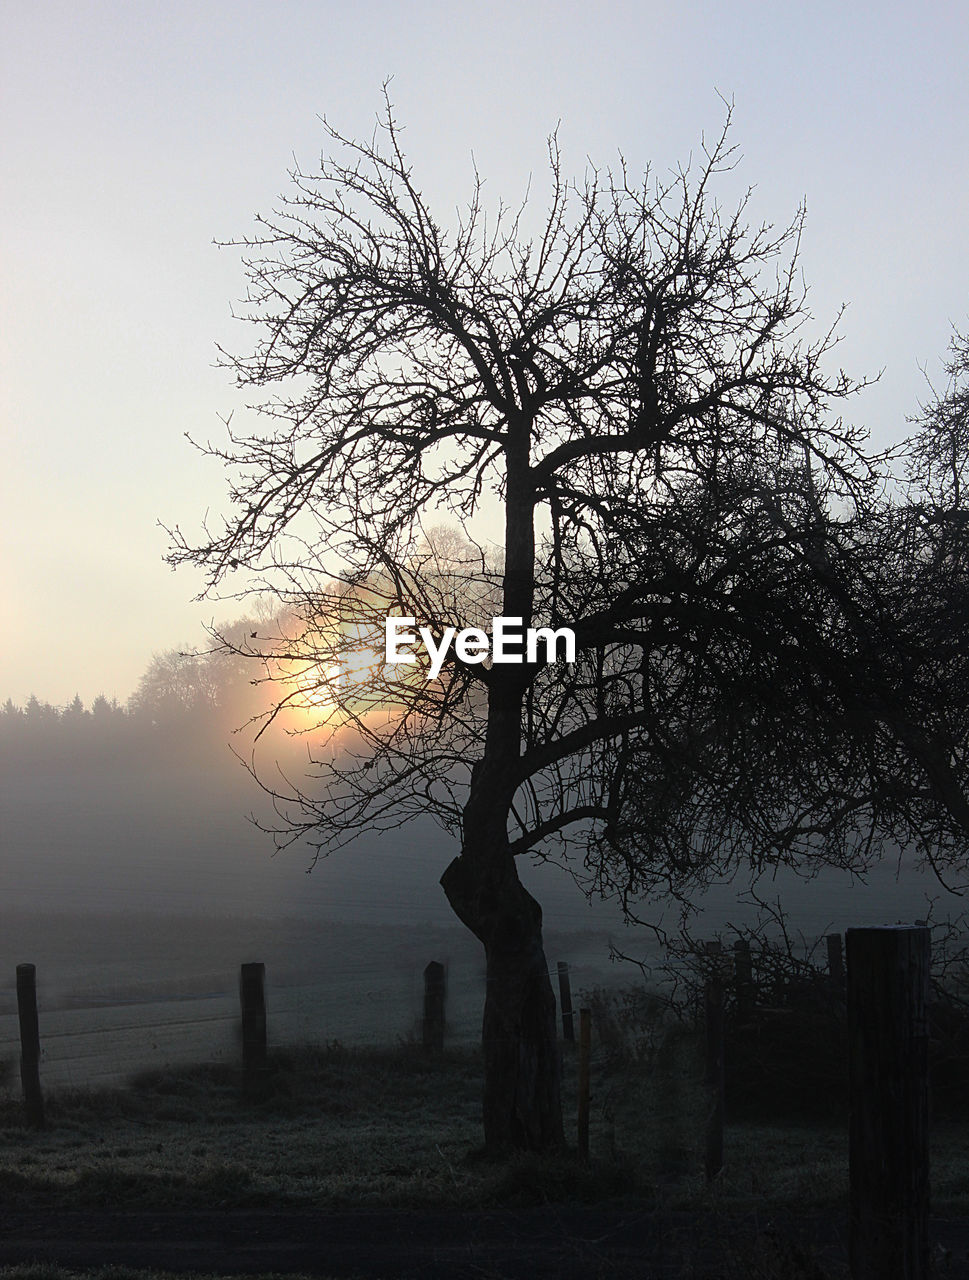 BARE TREE IN FOGGY WEATHER